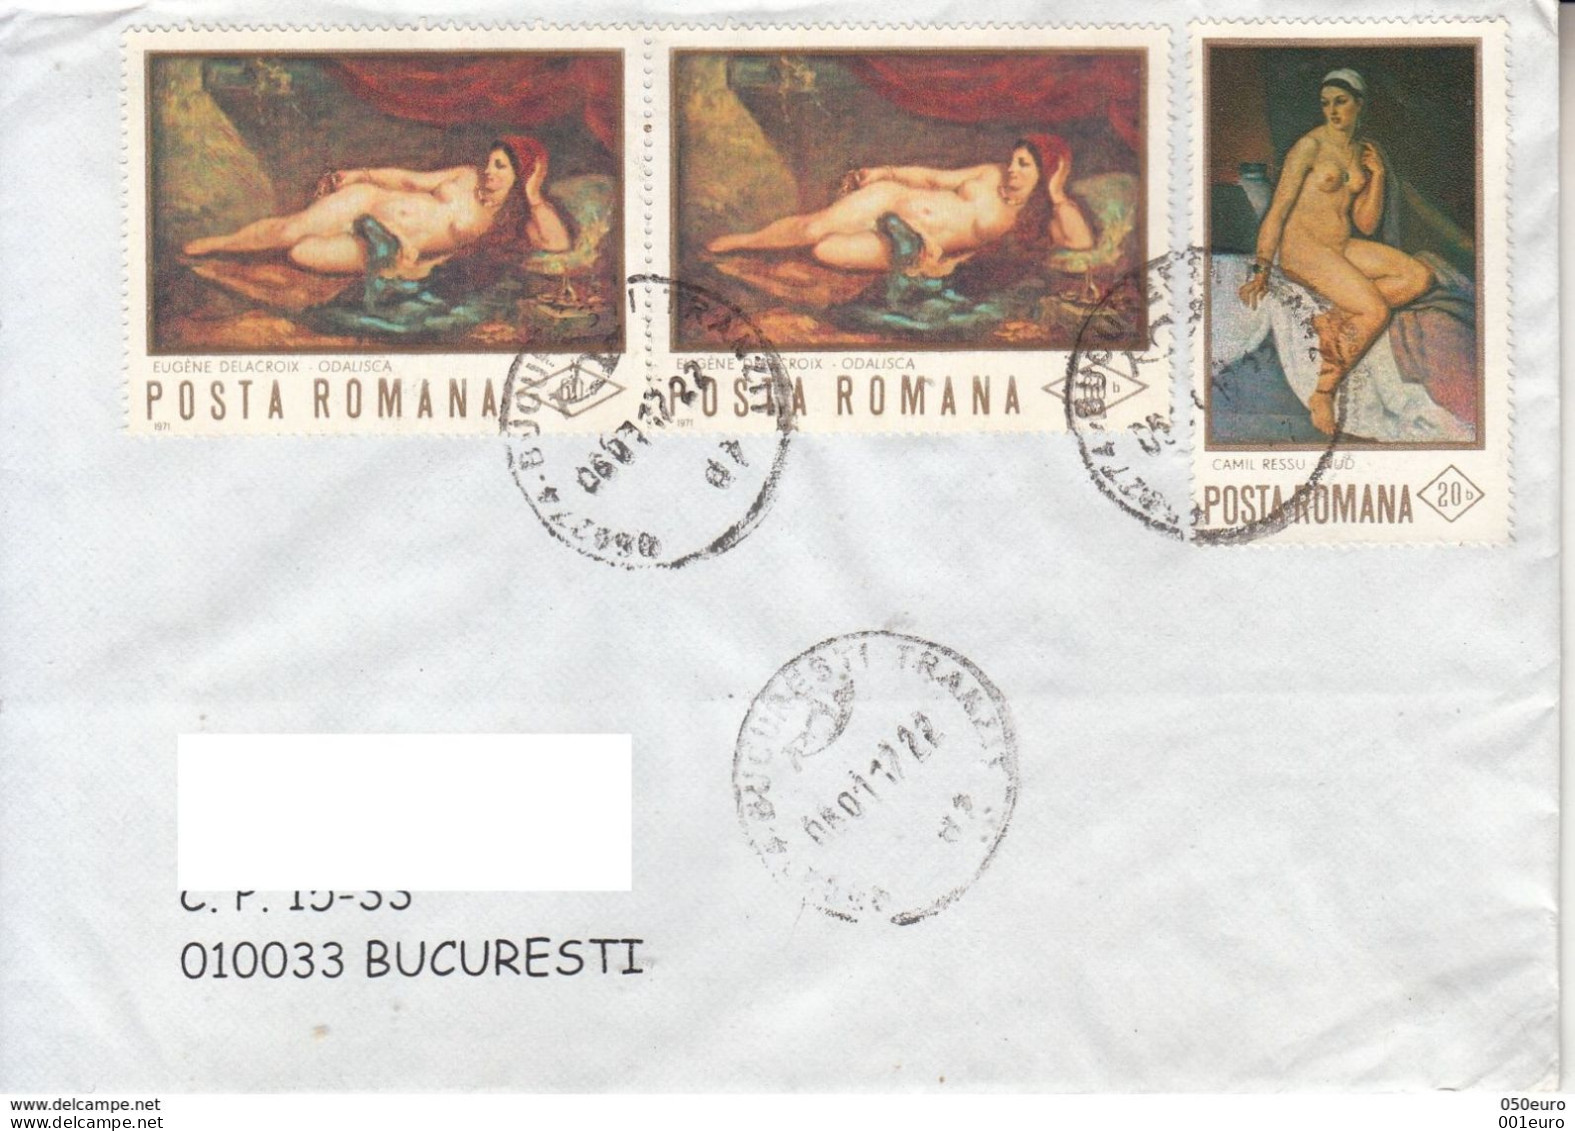 # ROMANIA : Lot Of 4 Covers Circulated As Domestic Letters In Romania #1043364880 - Registered Shipping! - Brieven En Documenten